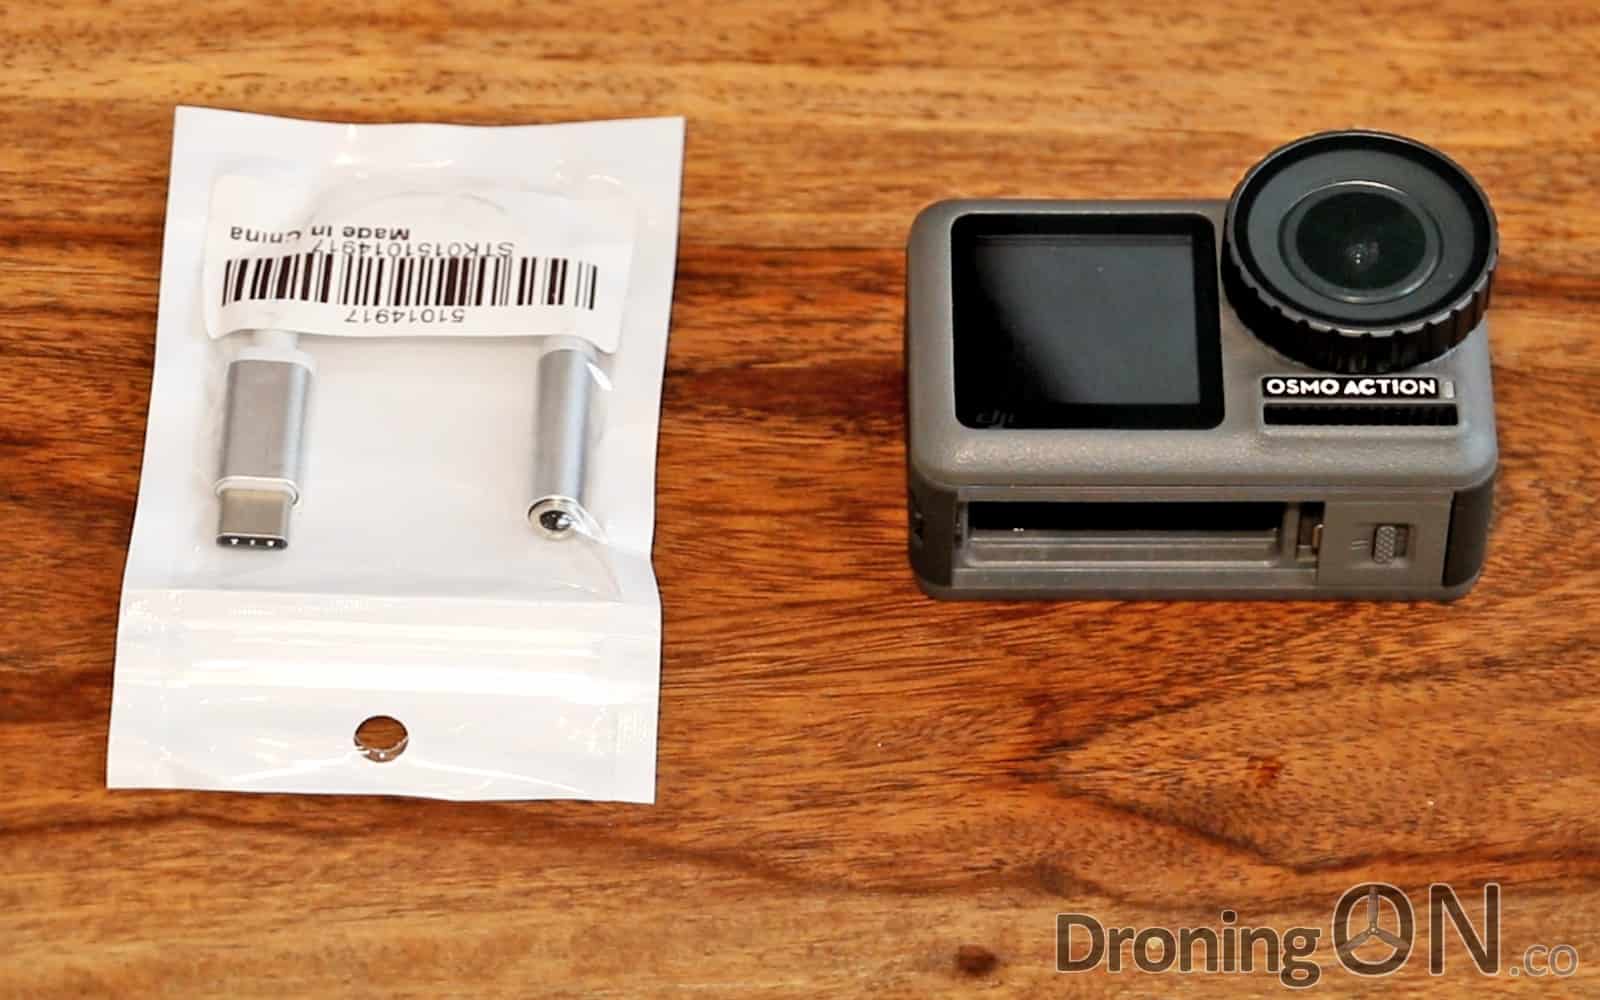 The DJI Osmo Action camera, will it work with third-party 3.5mm USB-C adapters, or not?